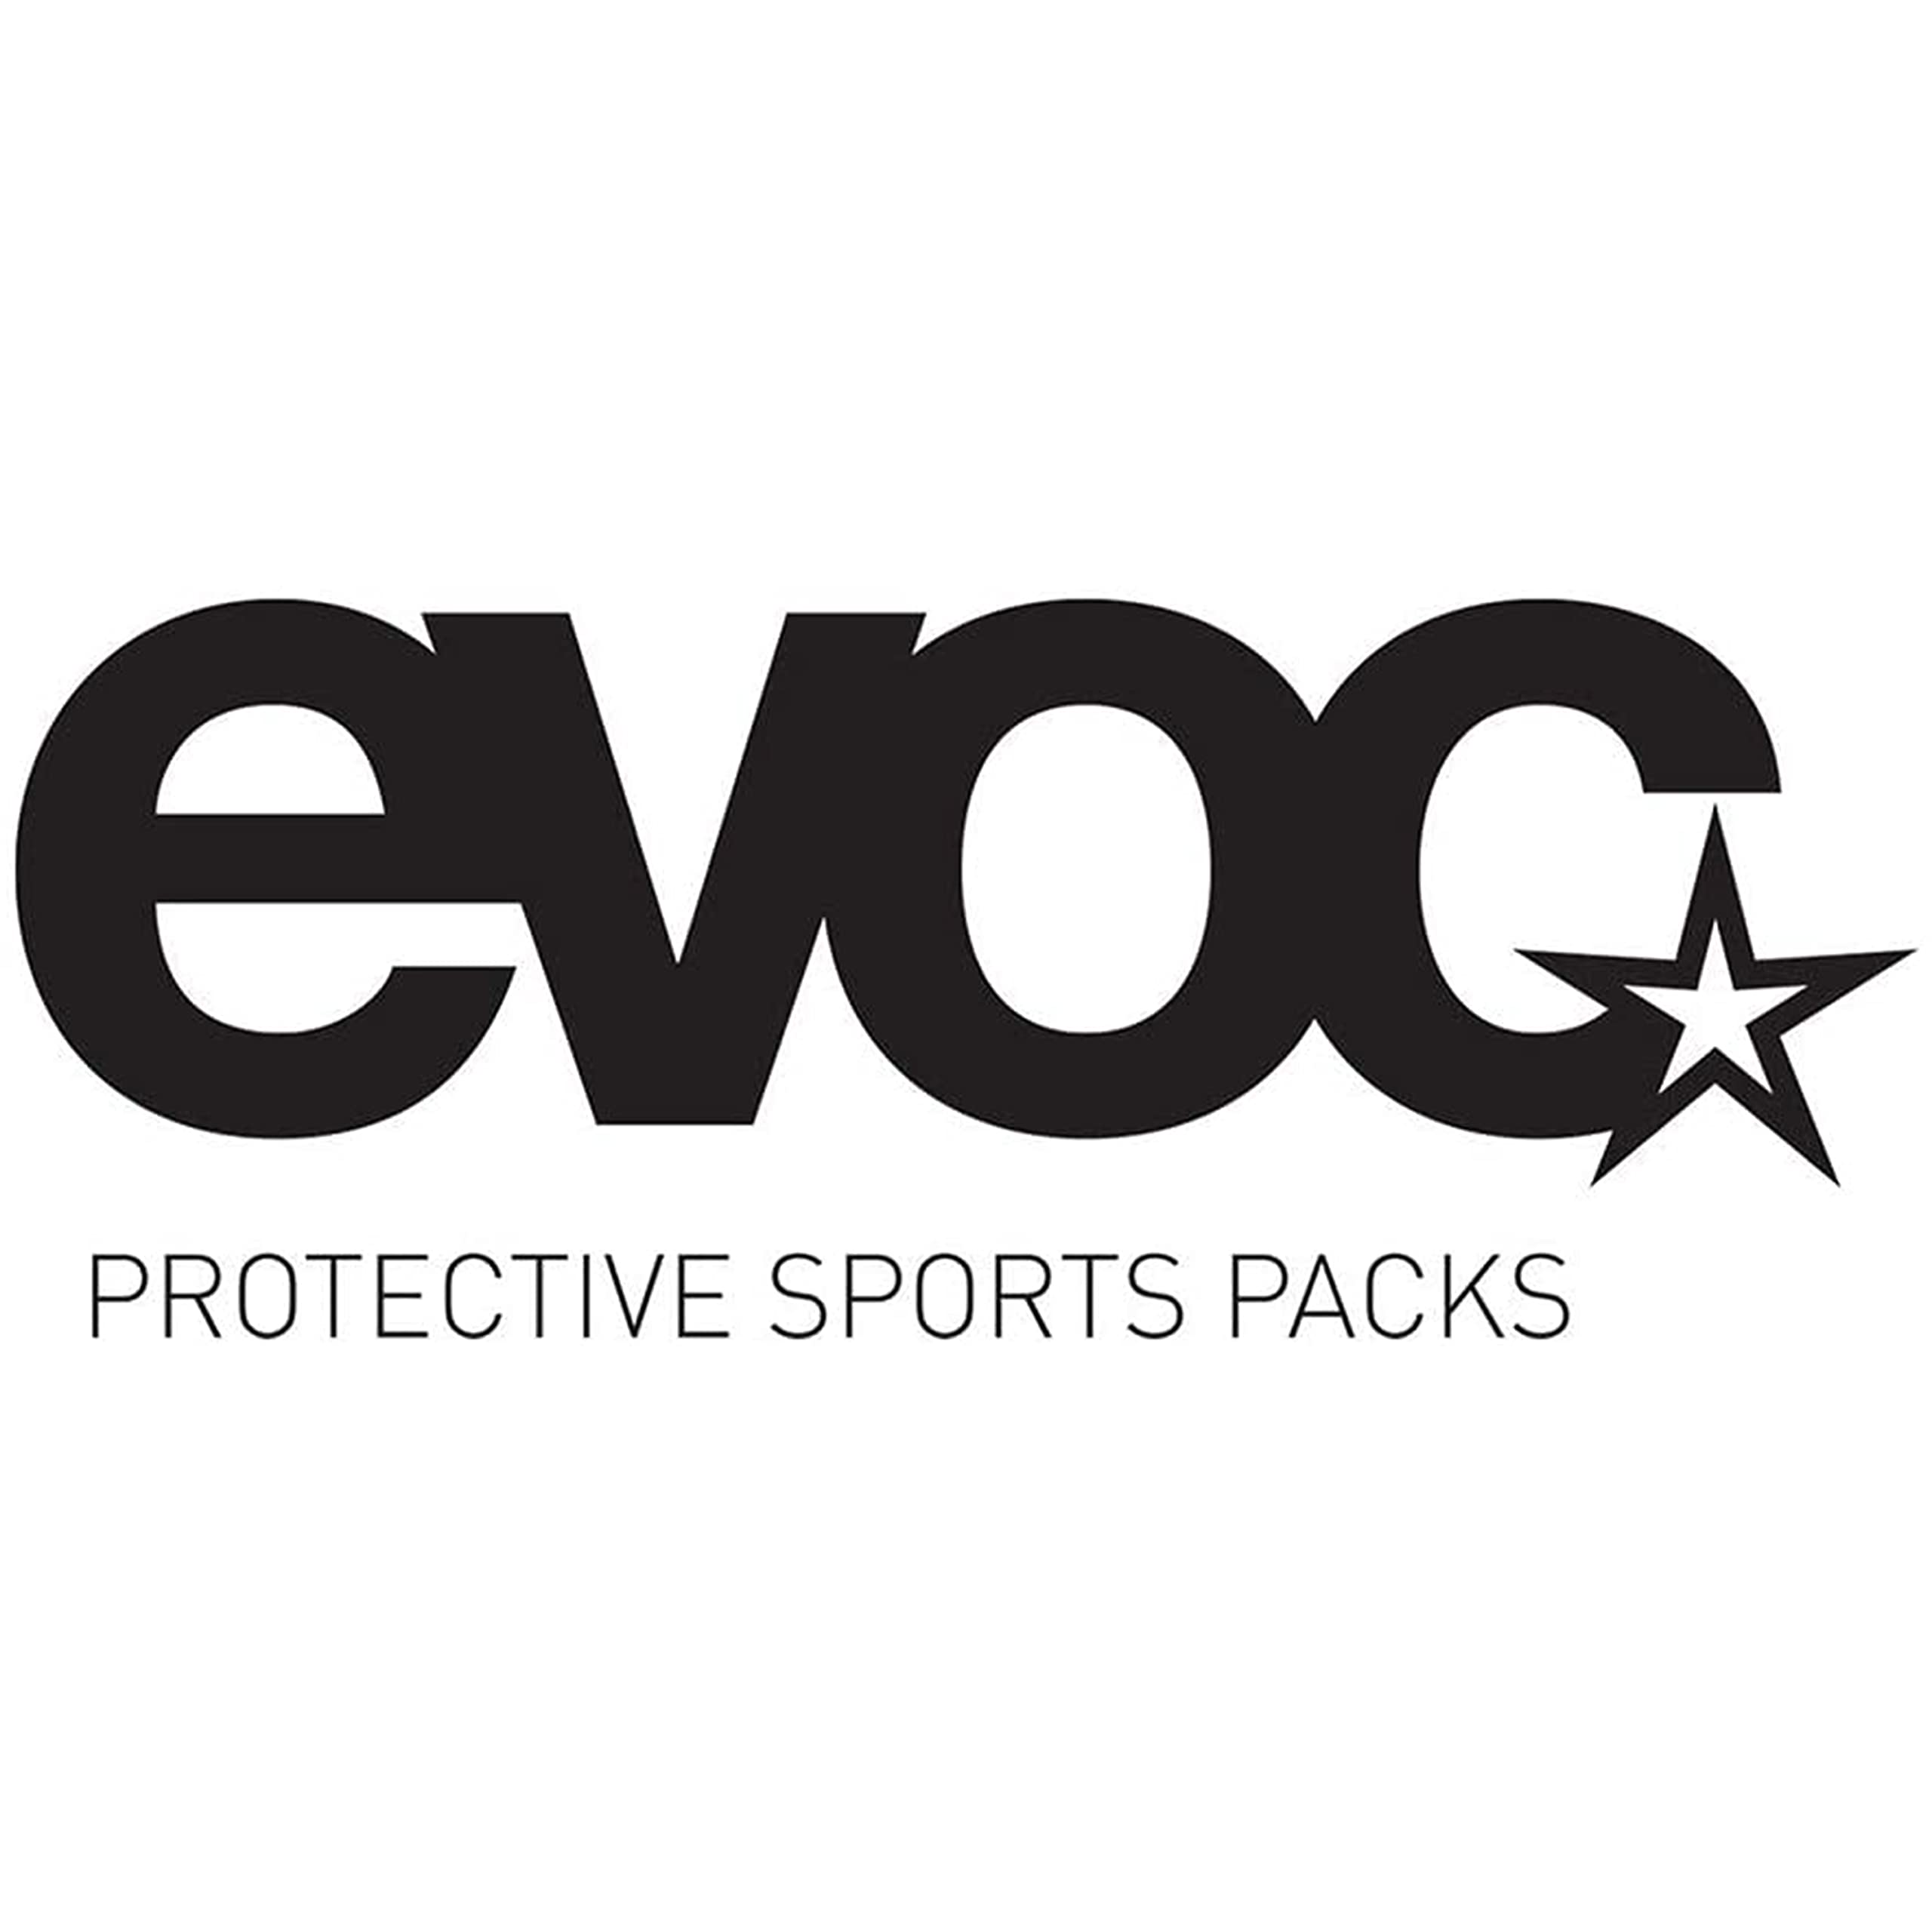 Evoc, Mission, Backpack, 22L, Curry